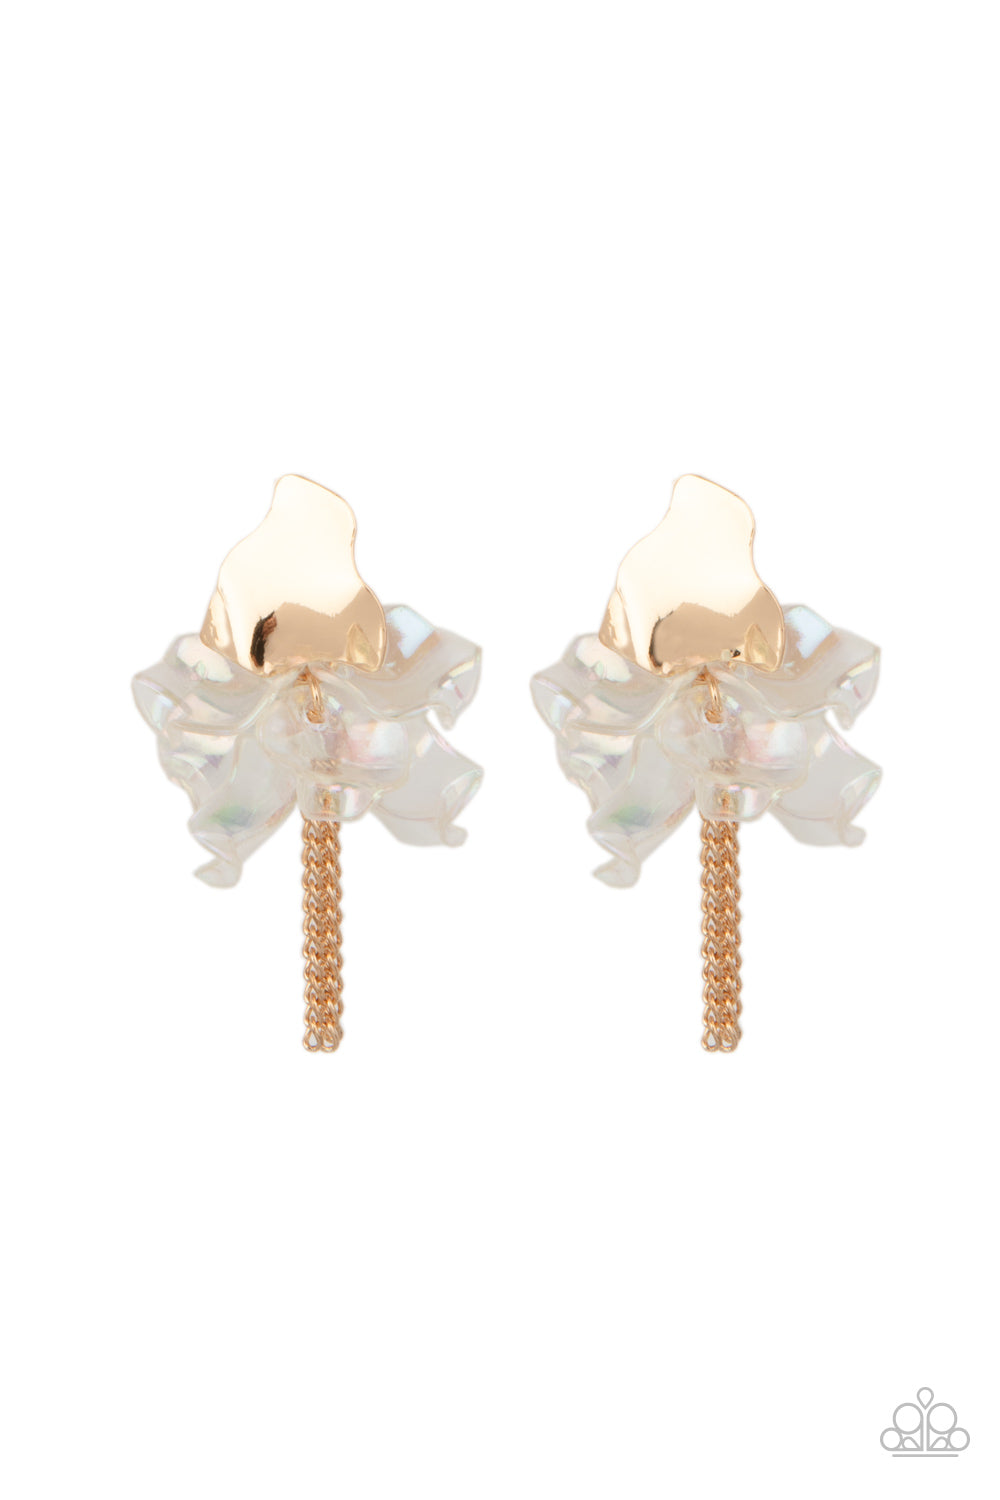 Harmonically Holographic Earrings__Gold